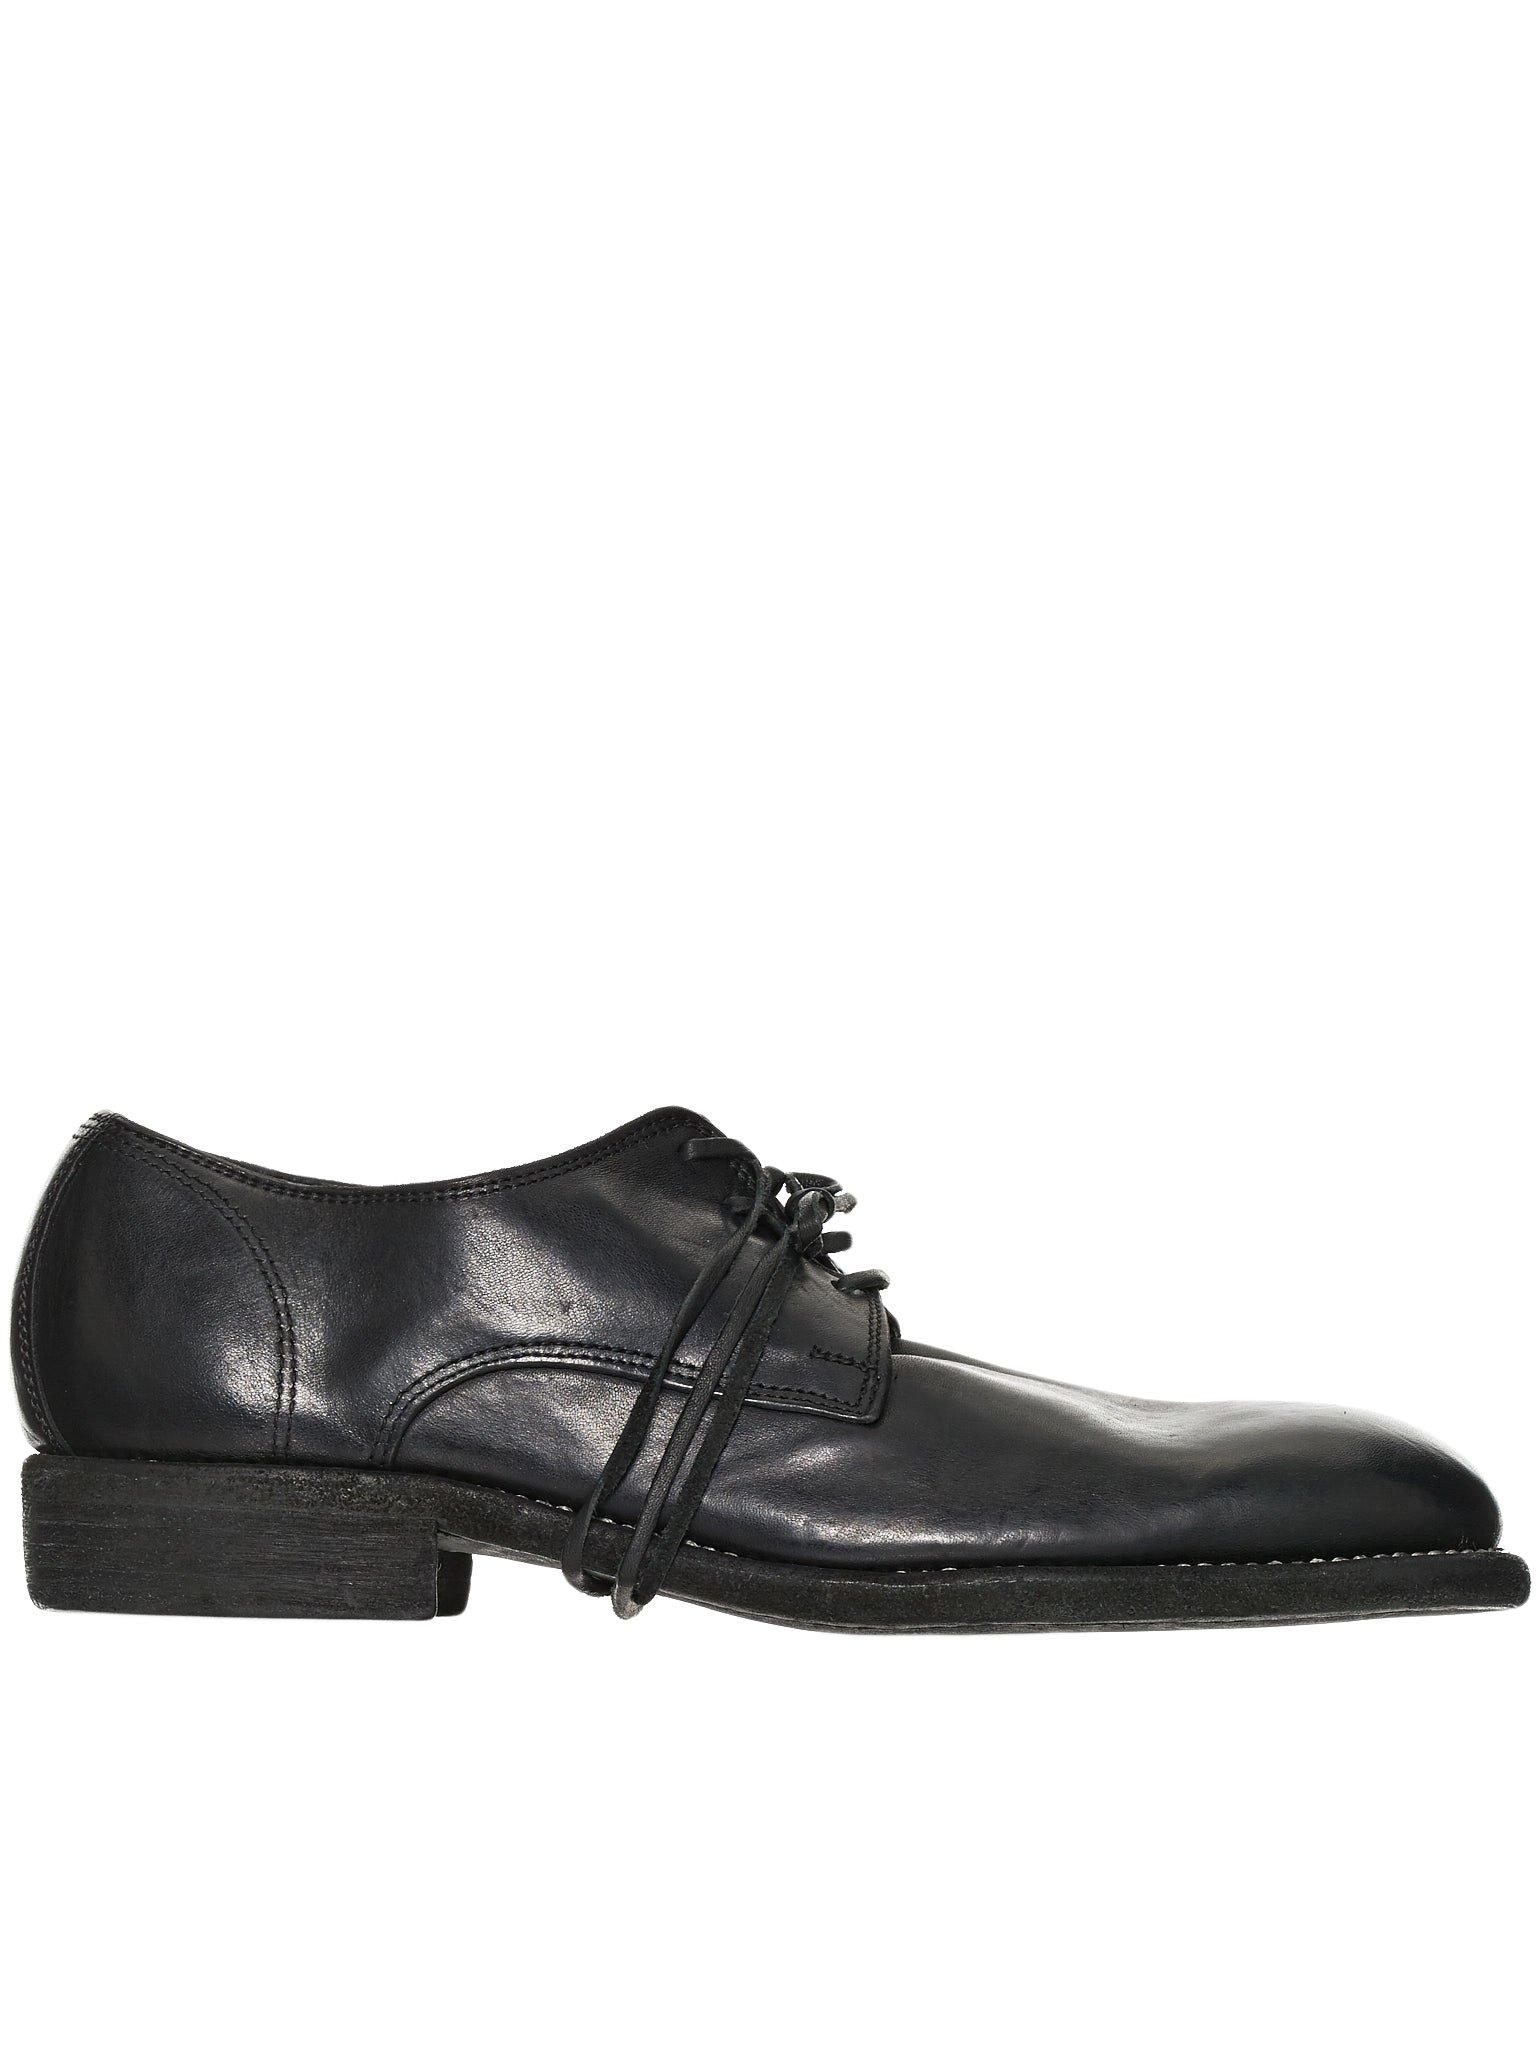 Guidi 992 Horse Leather Derby in Black for Men - Lyst